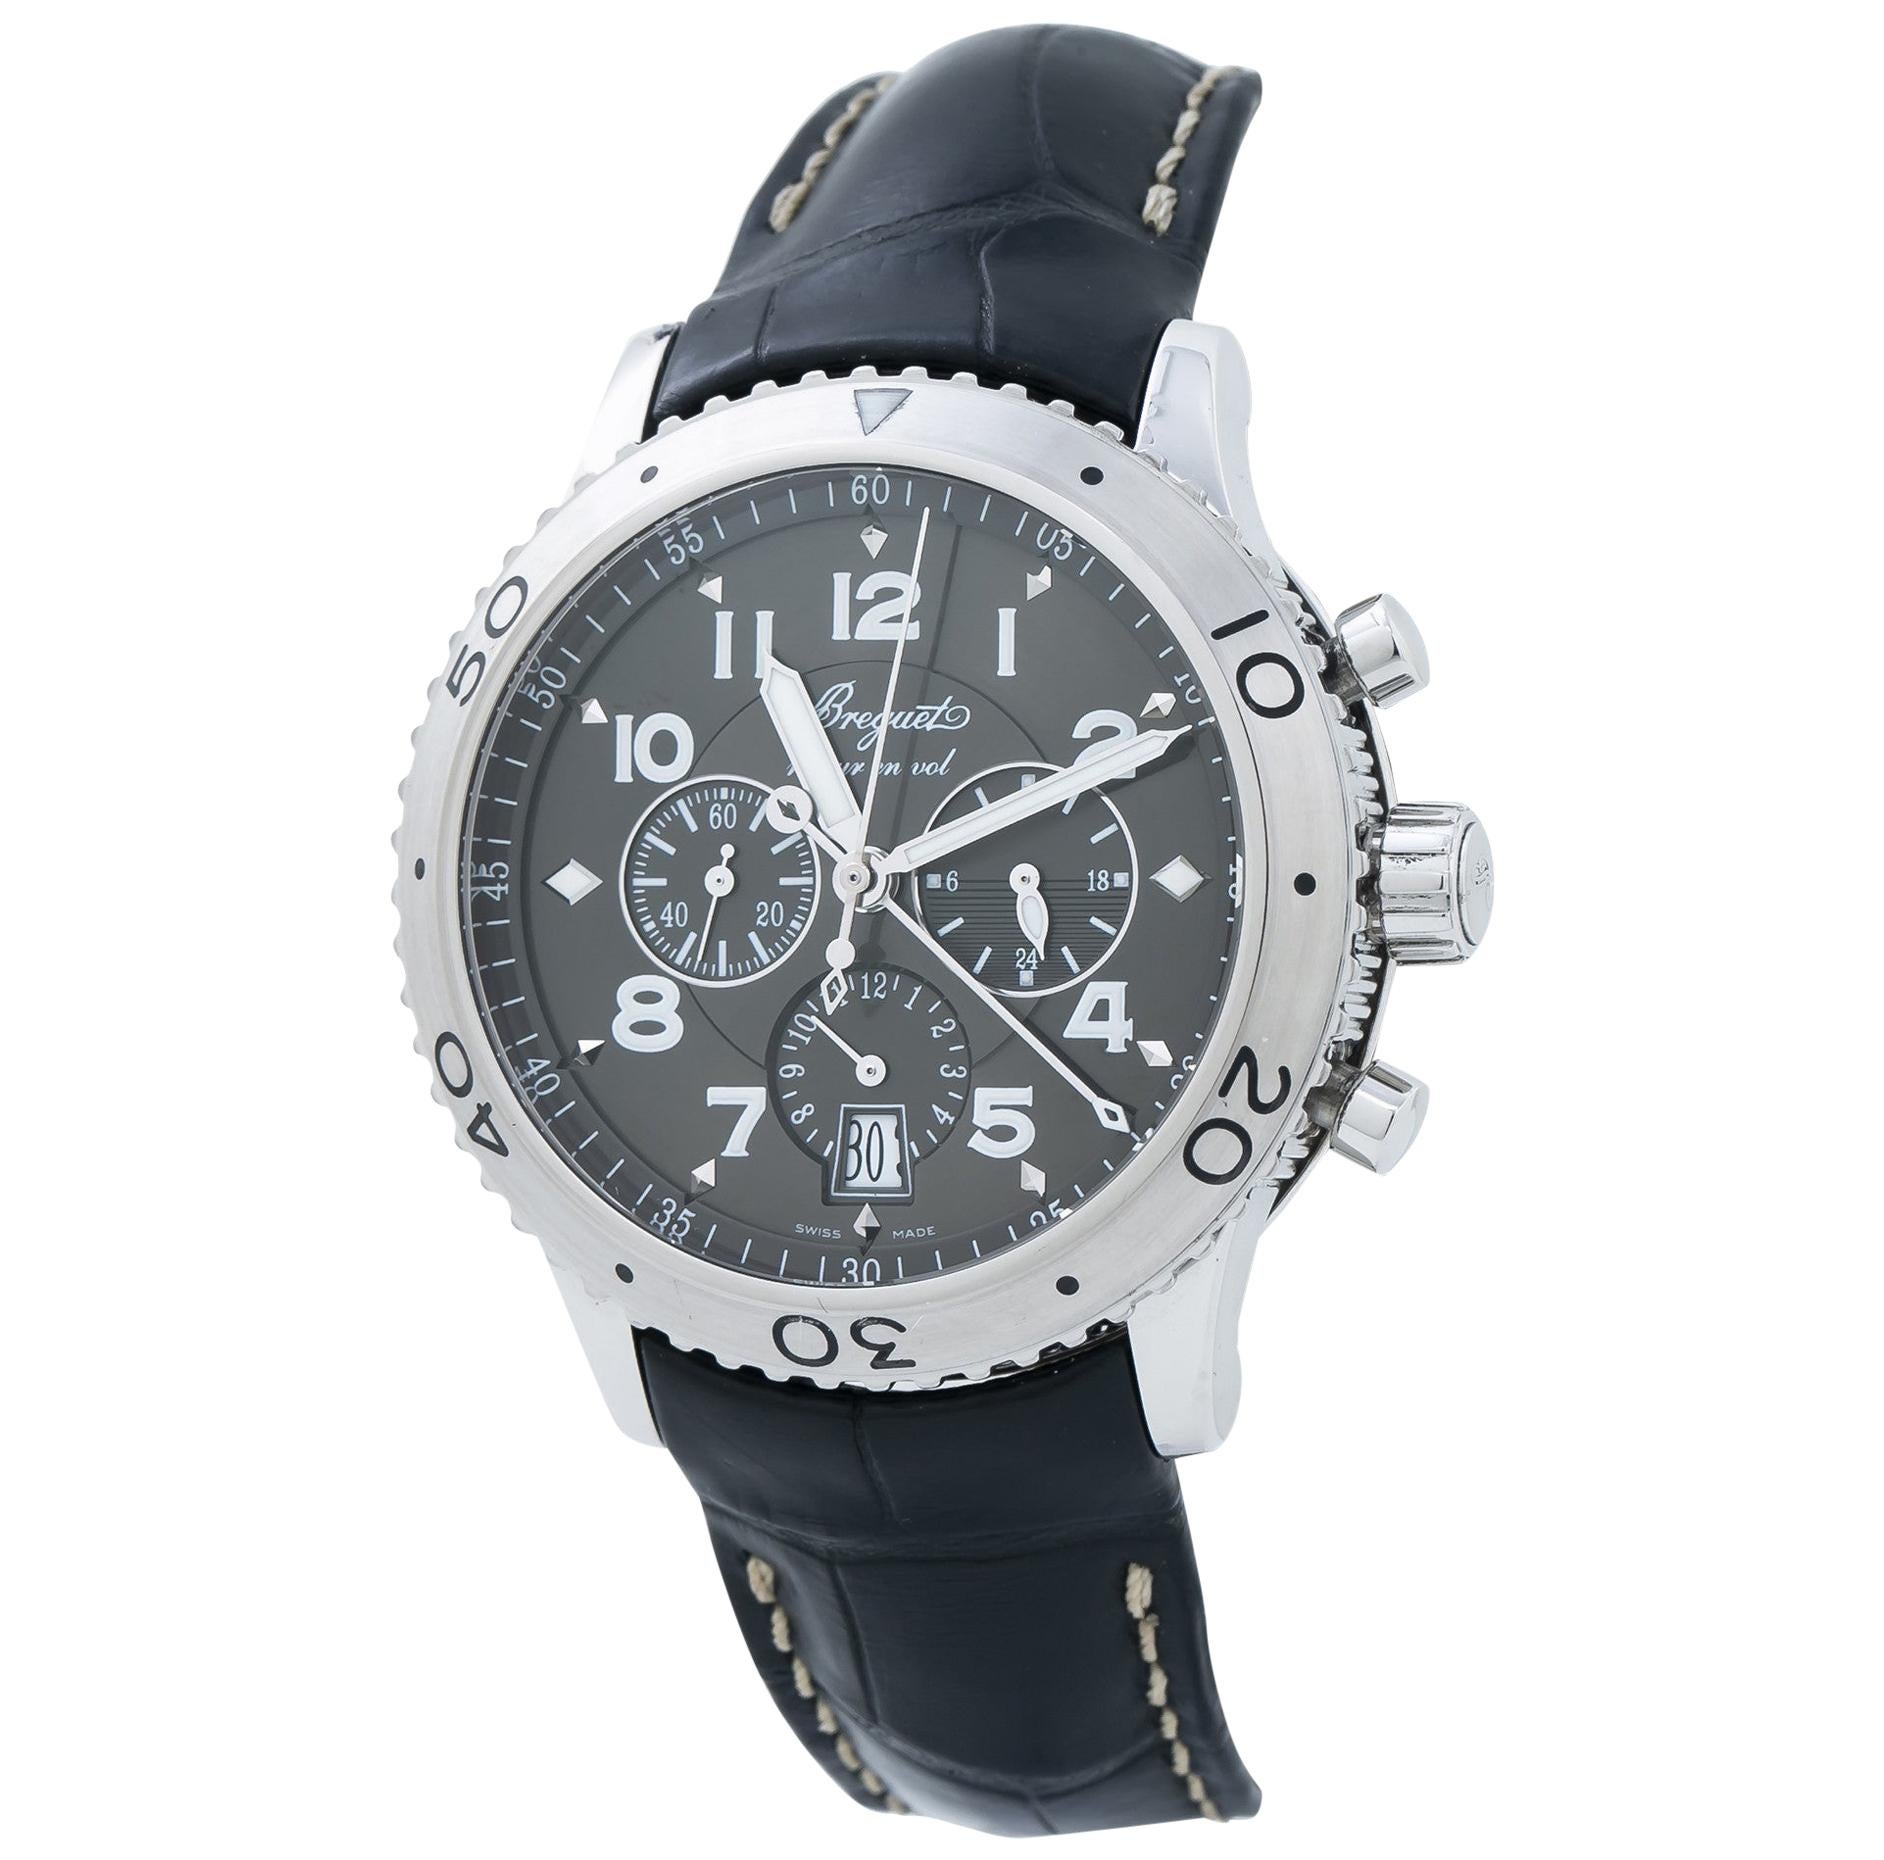 Breguet Type XXI Flyback Chronograph 3810 SS Ruthenium Dial Auto Men's Watch For Sale